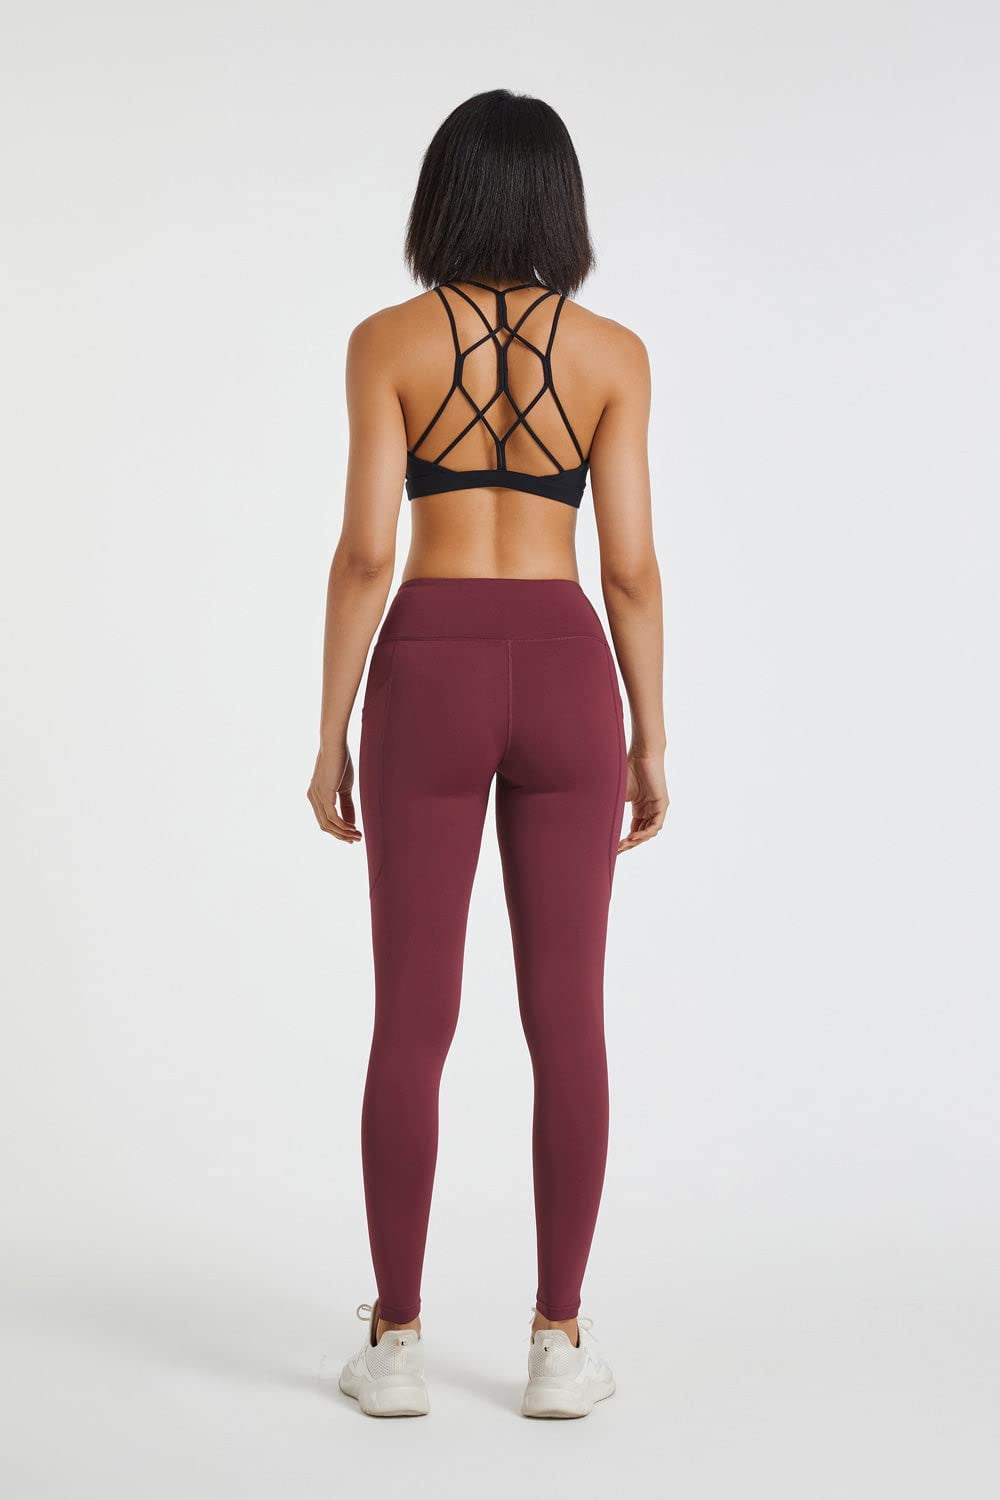 LA7 Burgundy Crossover Leggings for Women with Pockets for Gyming